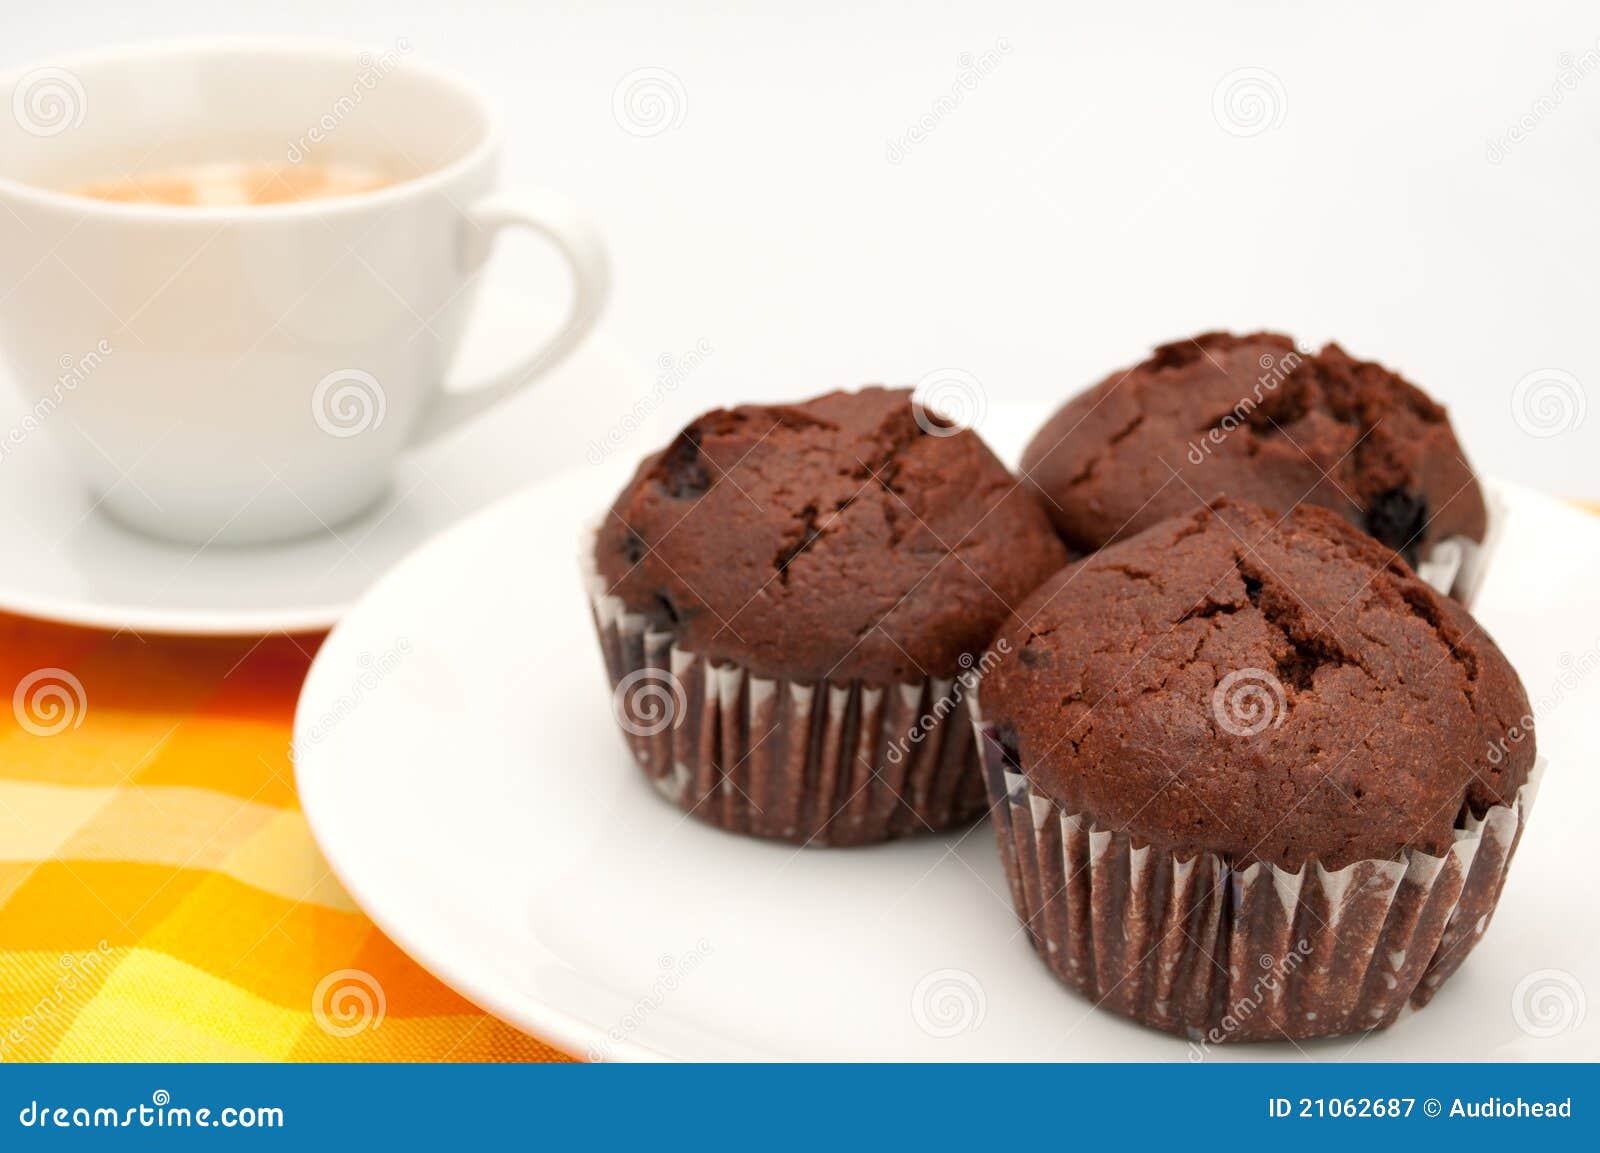 clipart muffins and coffee - photo #38